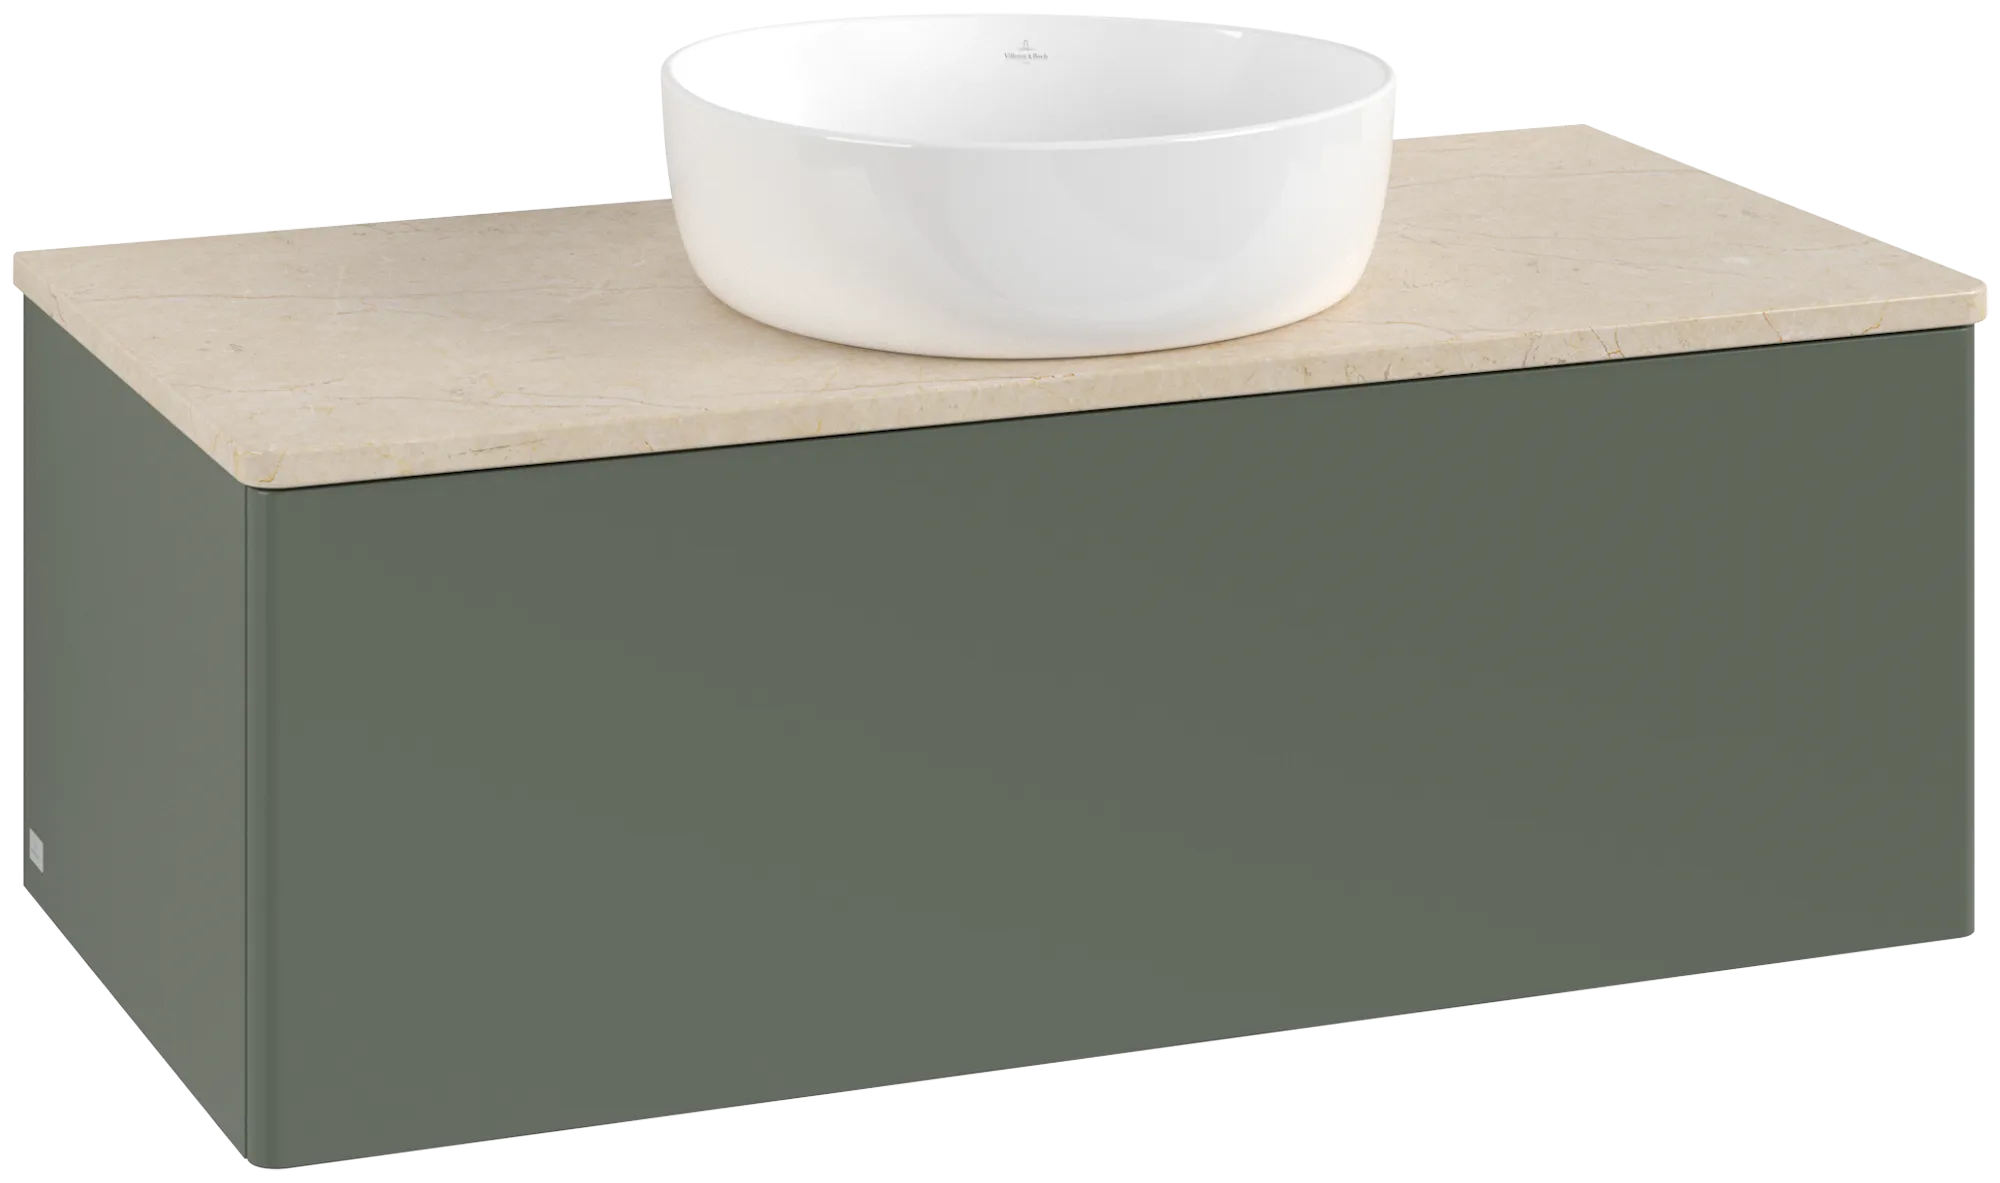 Picture of VILLEROY BOCH Antao Vanity unit, with lighting, 1 pull-out compartment, 1000 x 360 x 500 mm, Front without structure, Leaf Green Matt Lacquer / Botticino #L31013HL